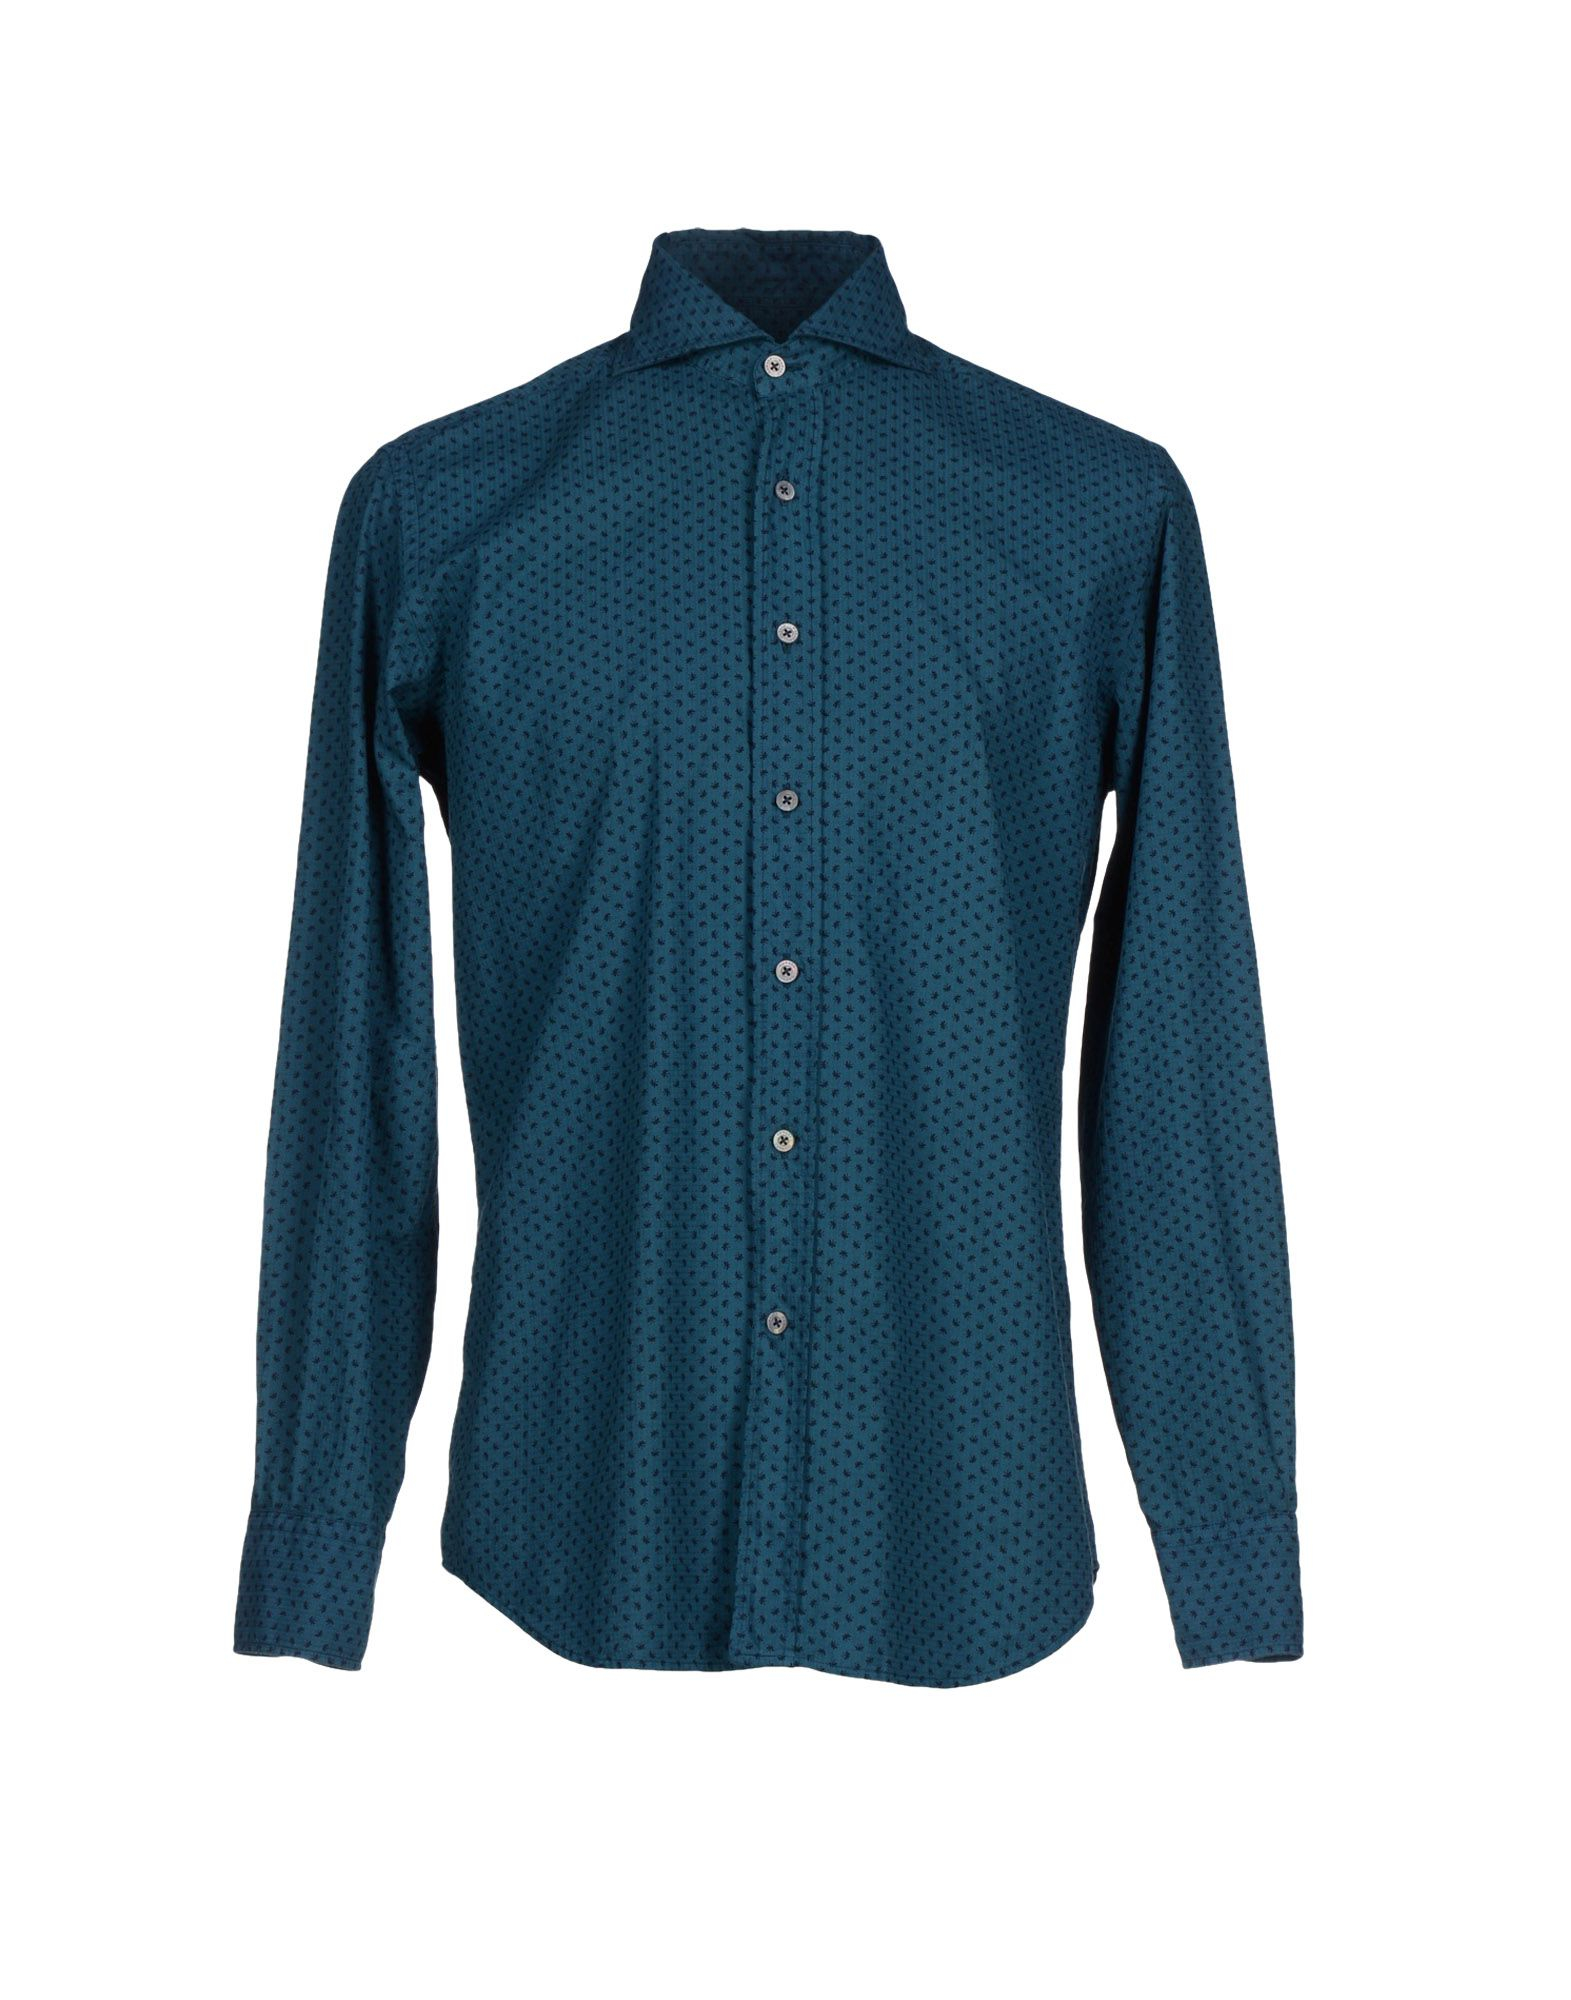 Lyst - Canali Shirt in Green for Men